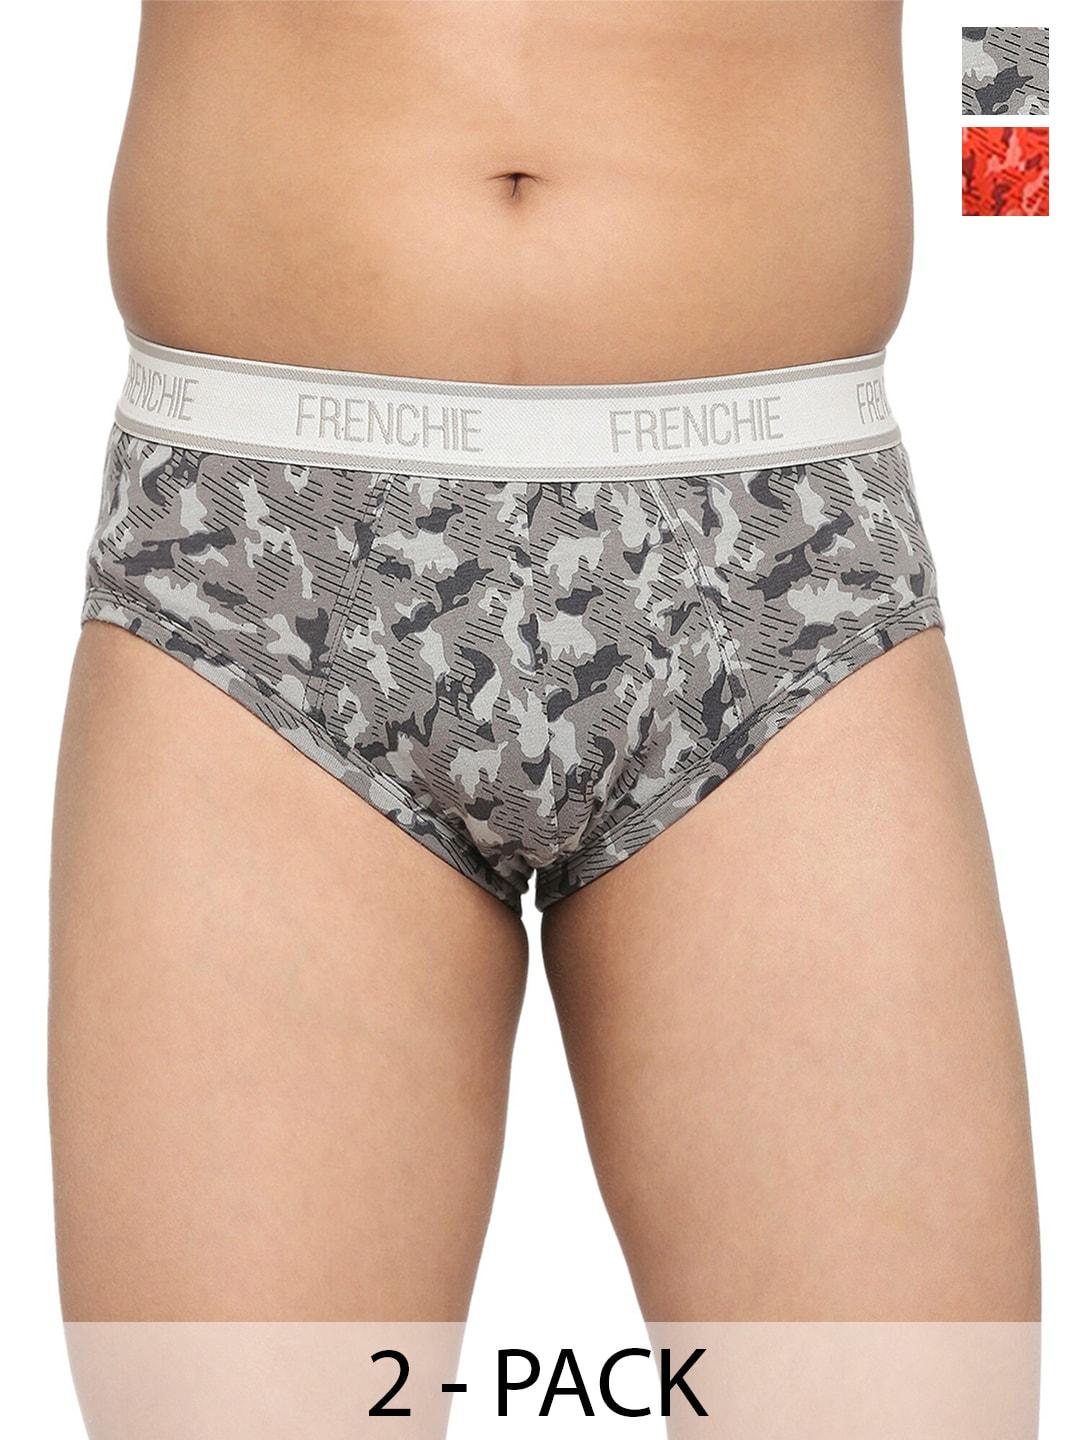 frenchie-boys-pack-of-2-abstract-printed-cotton-briefs-fr-bf-u1904-1x5-red-gray-xs